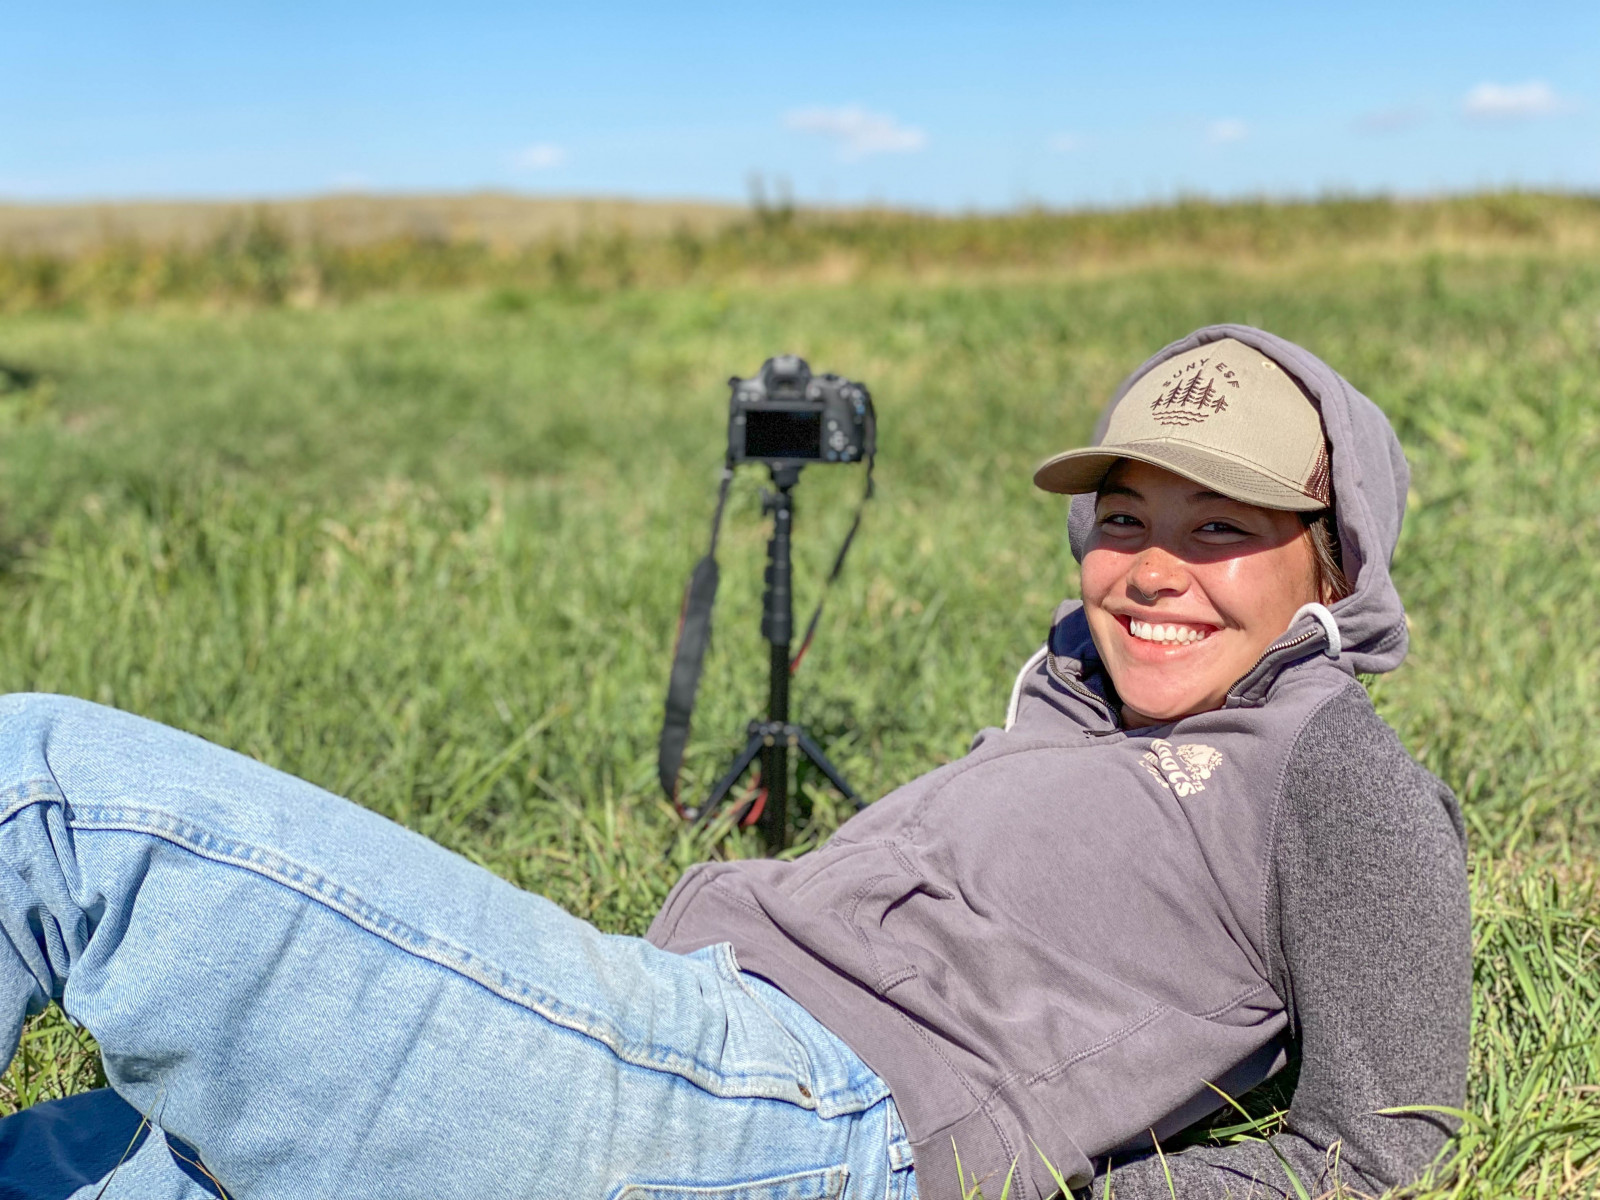 Eve relaxes in a field with her camera propped up behind her.